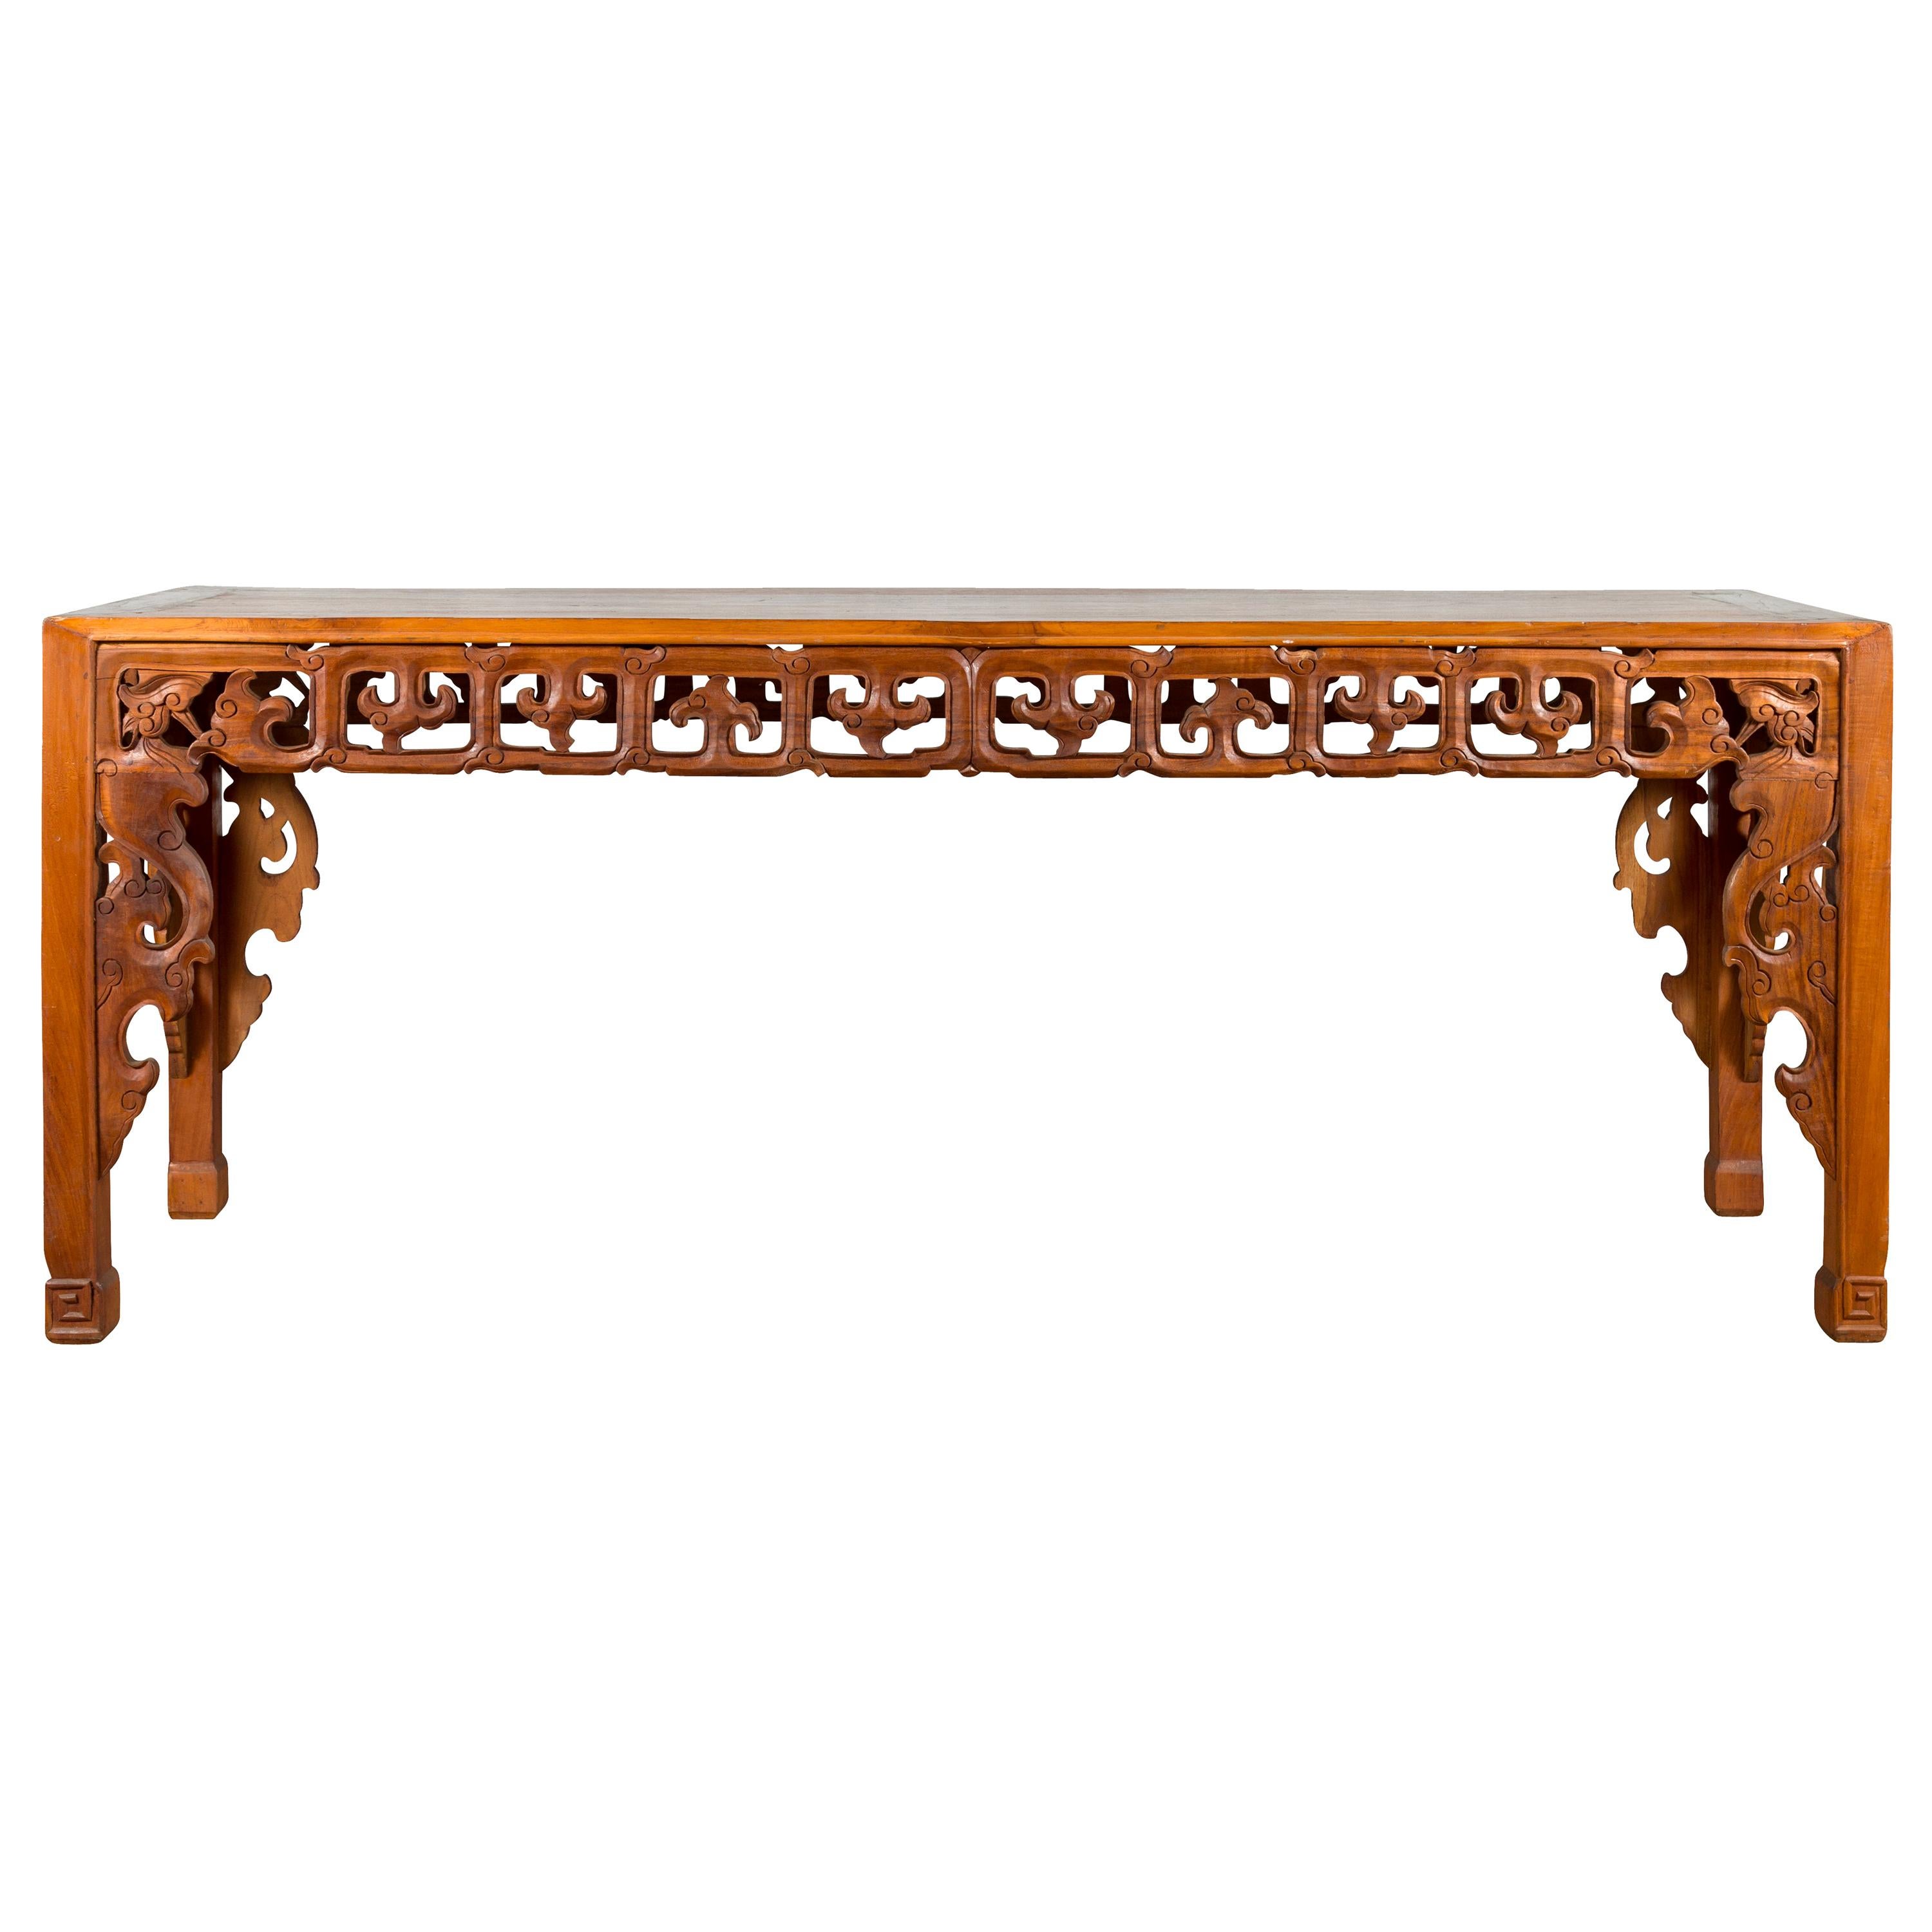 Chinese 19th Century Console Table with Cloud-Carved Apron and Scrolling Feet